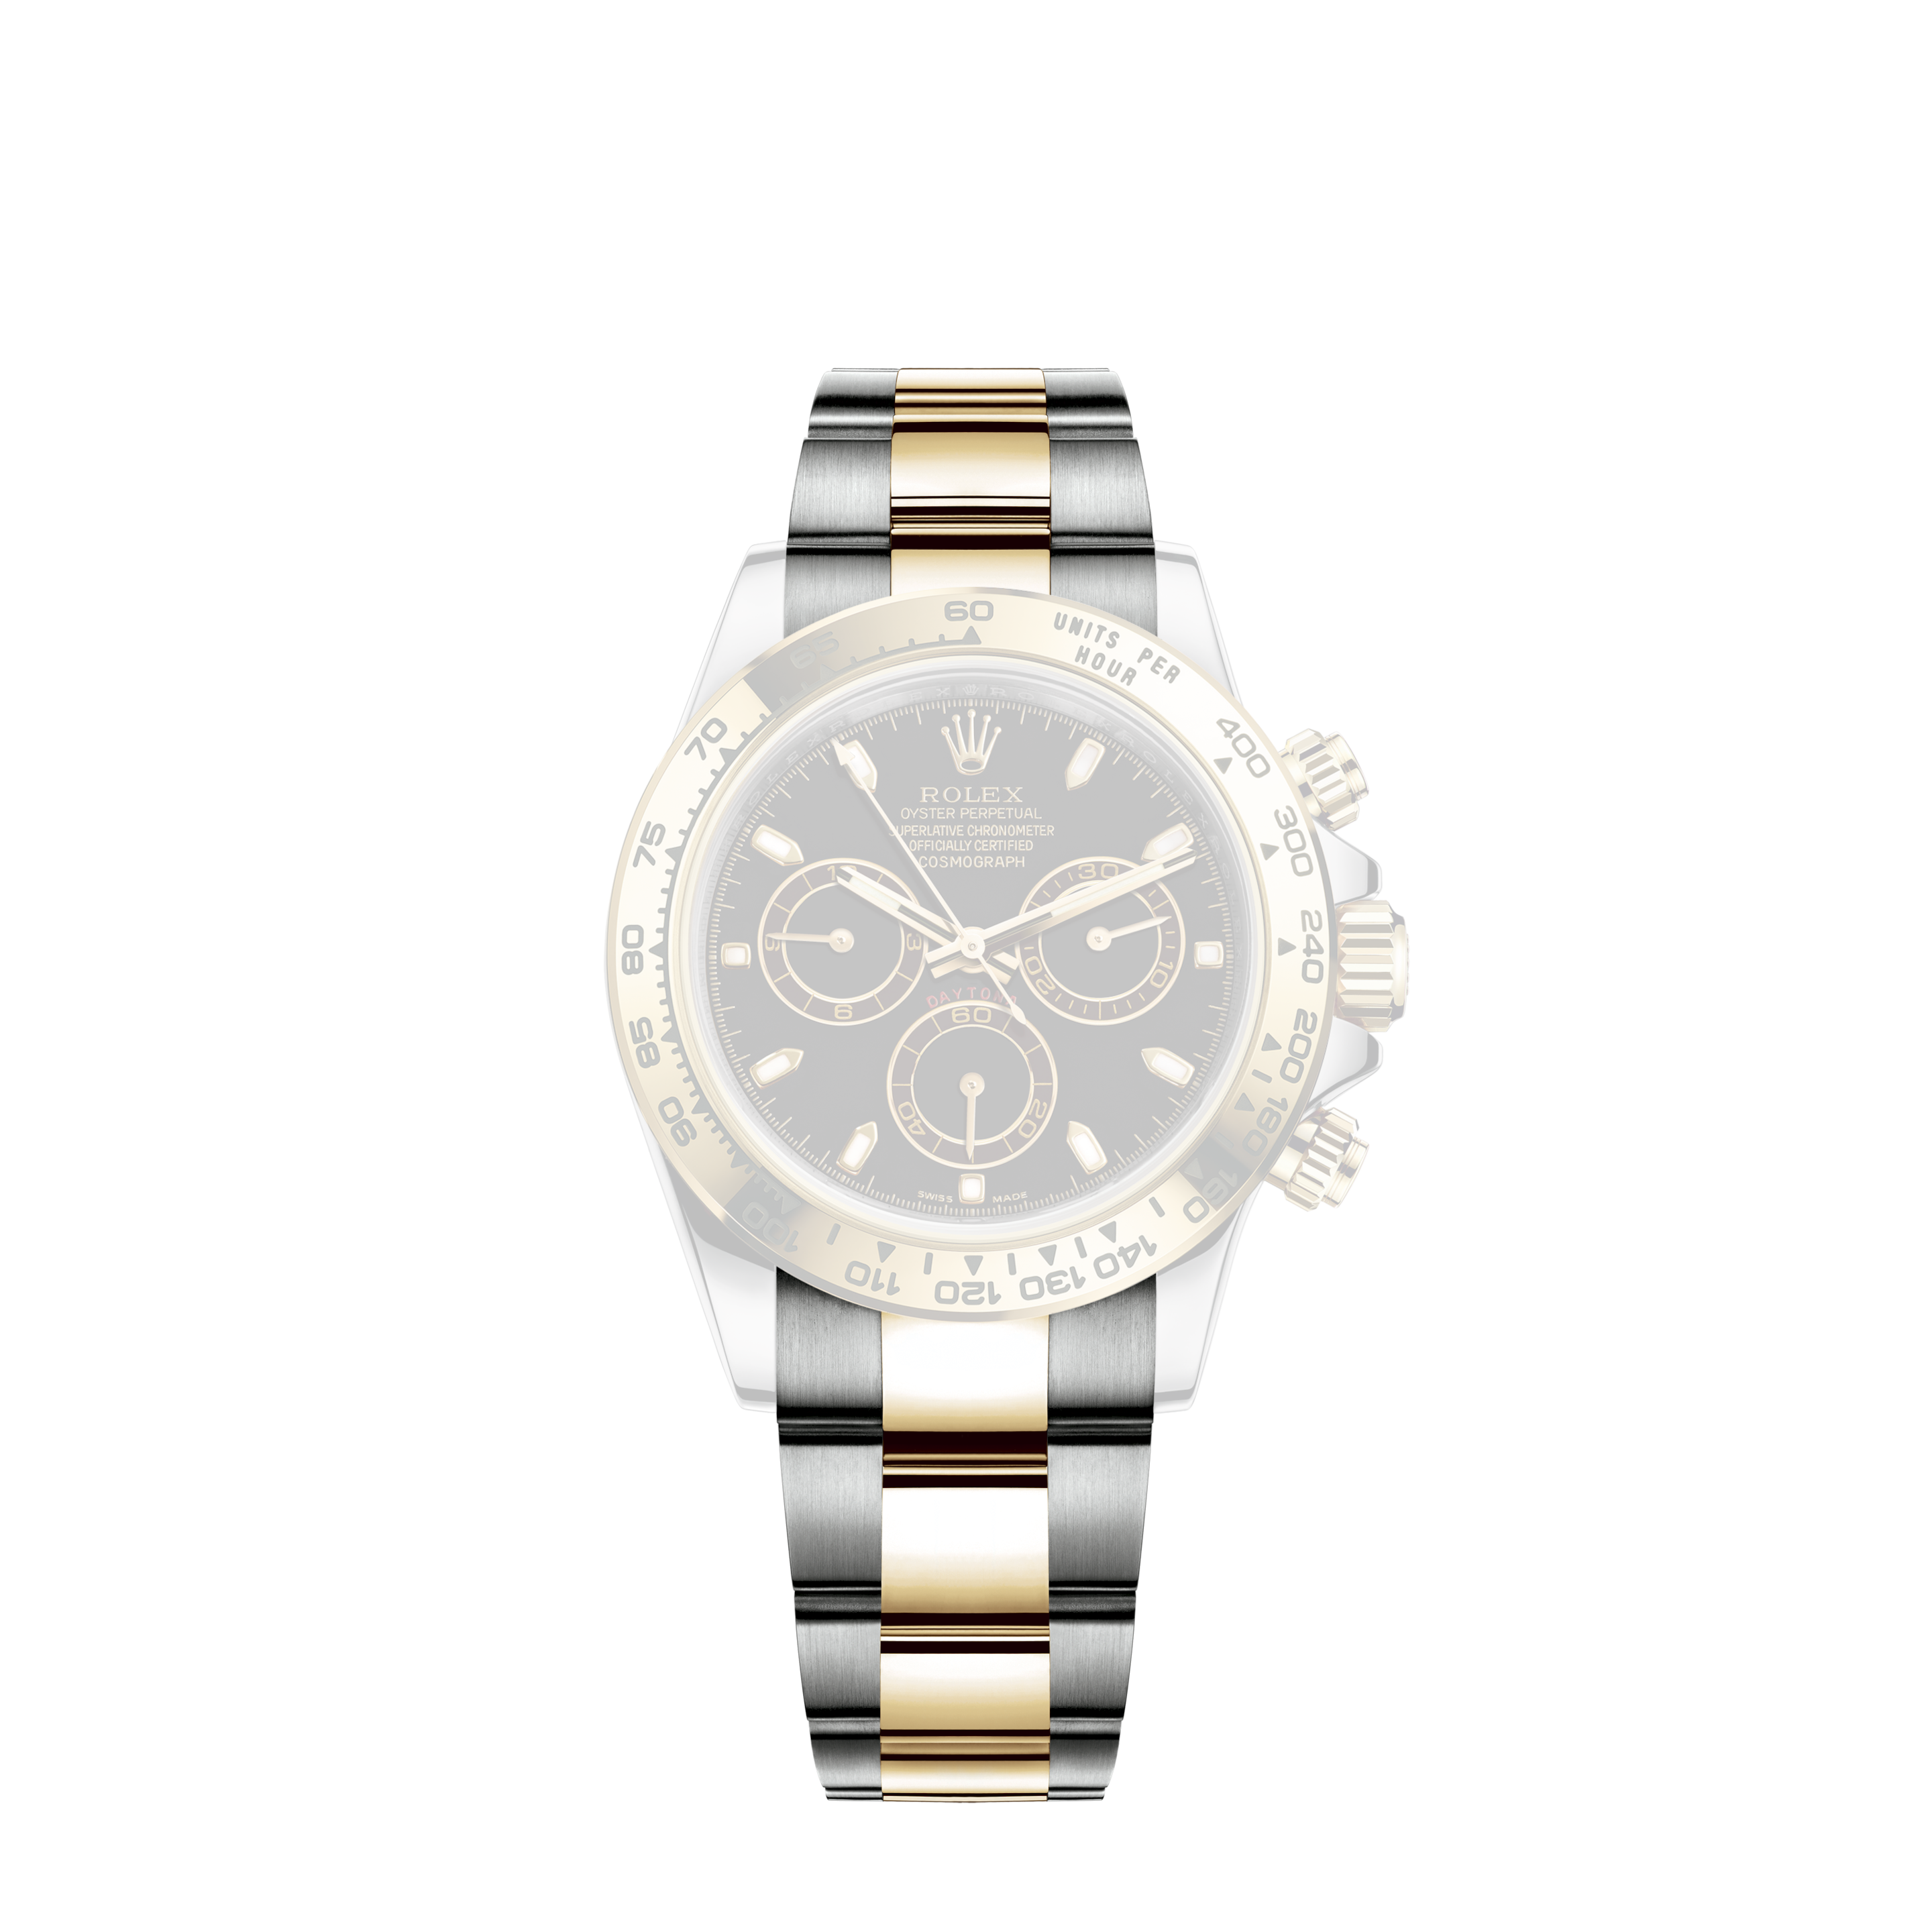 Rolex Submariner 14060M RRR Mint Conditions Box & Papers 2012Rolex Oyster Perpetual Lady No Date 176200 26mm Black Arabic 1YearWTY #1148-13